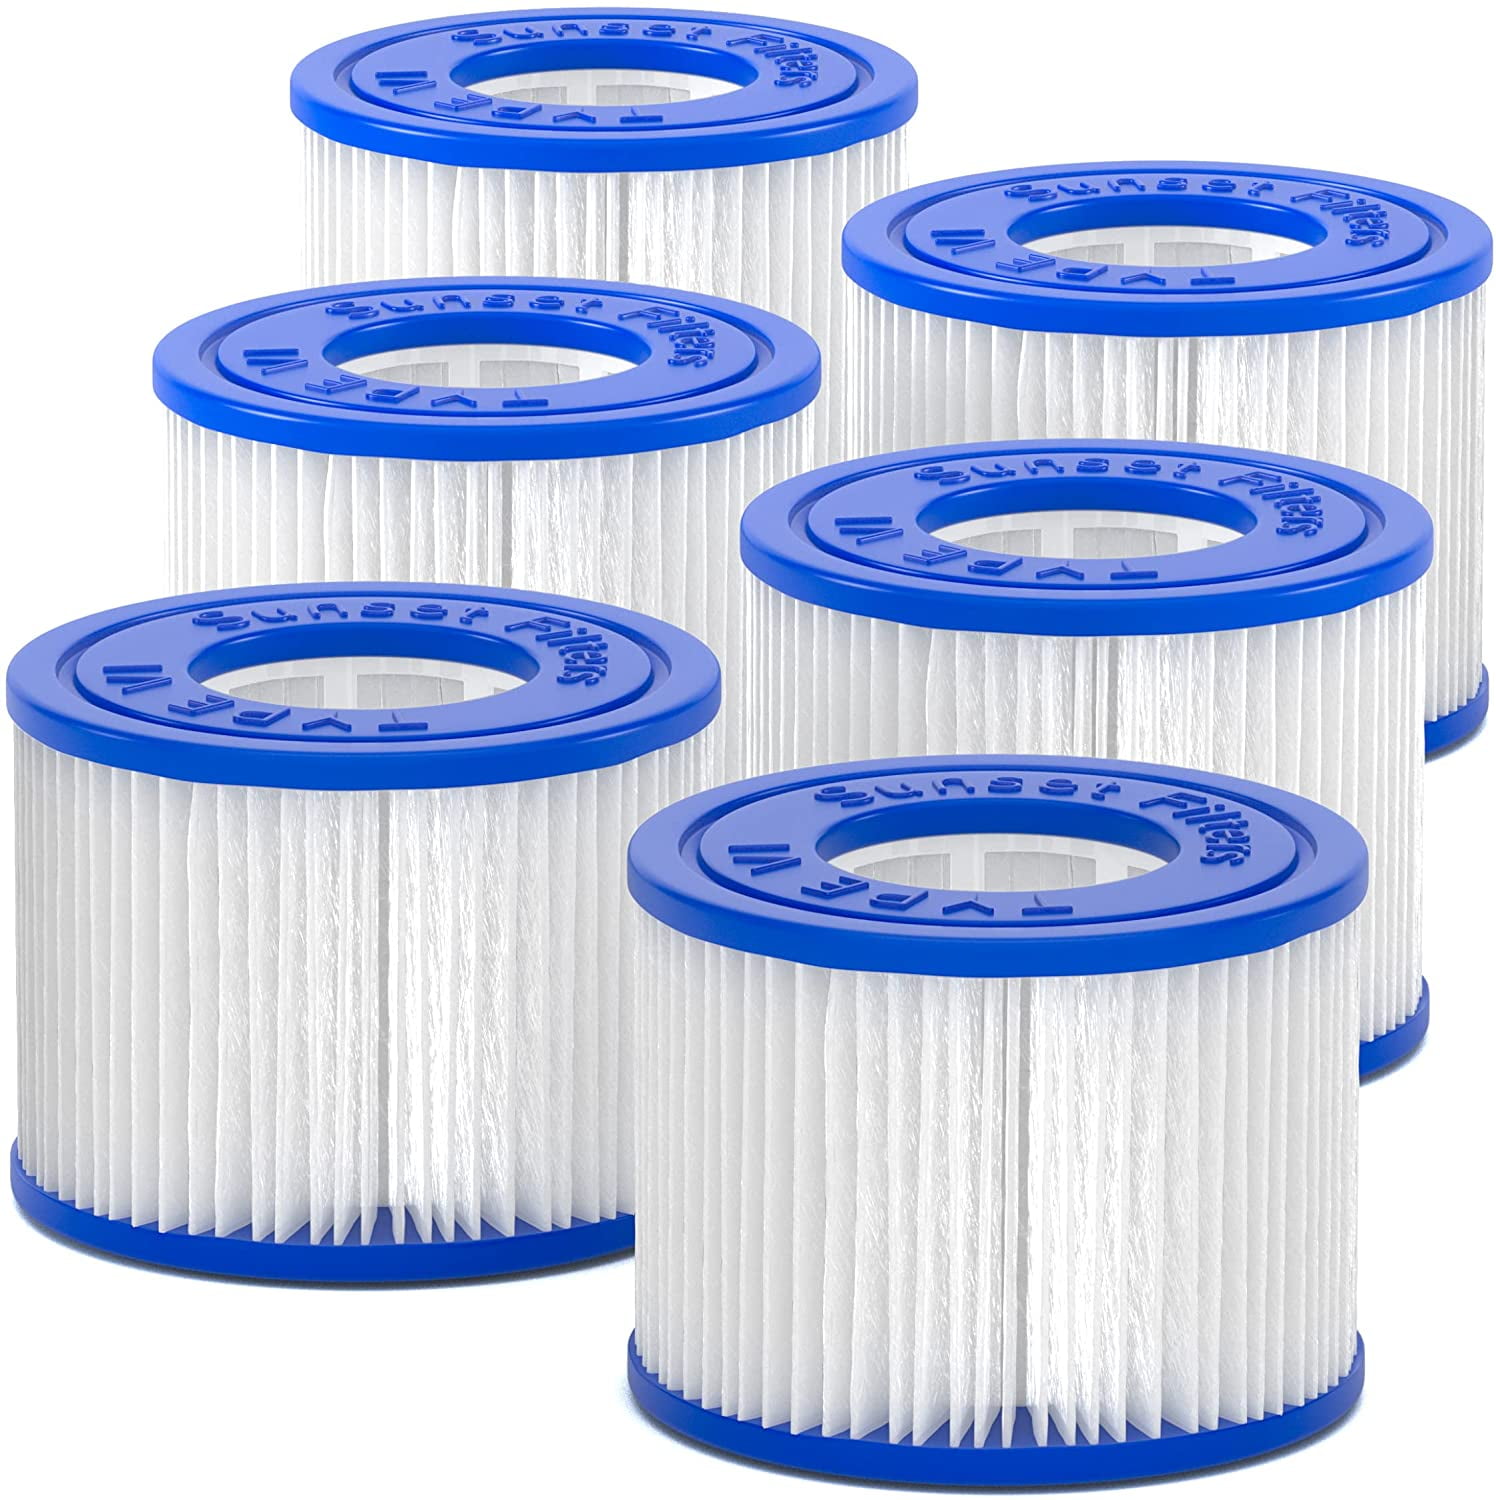 Intex new Filter Cartridges Replacement Pool Spa Water Filters Hot Tub 12 Pack 